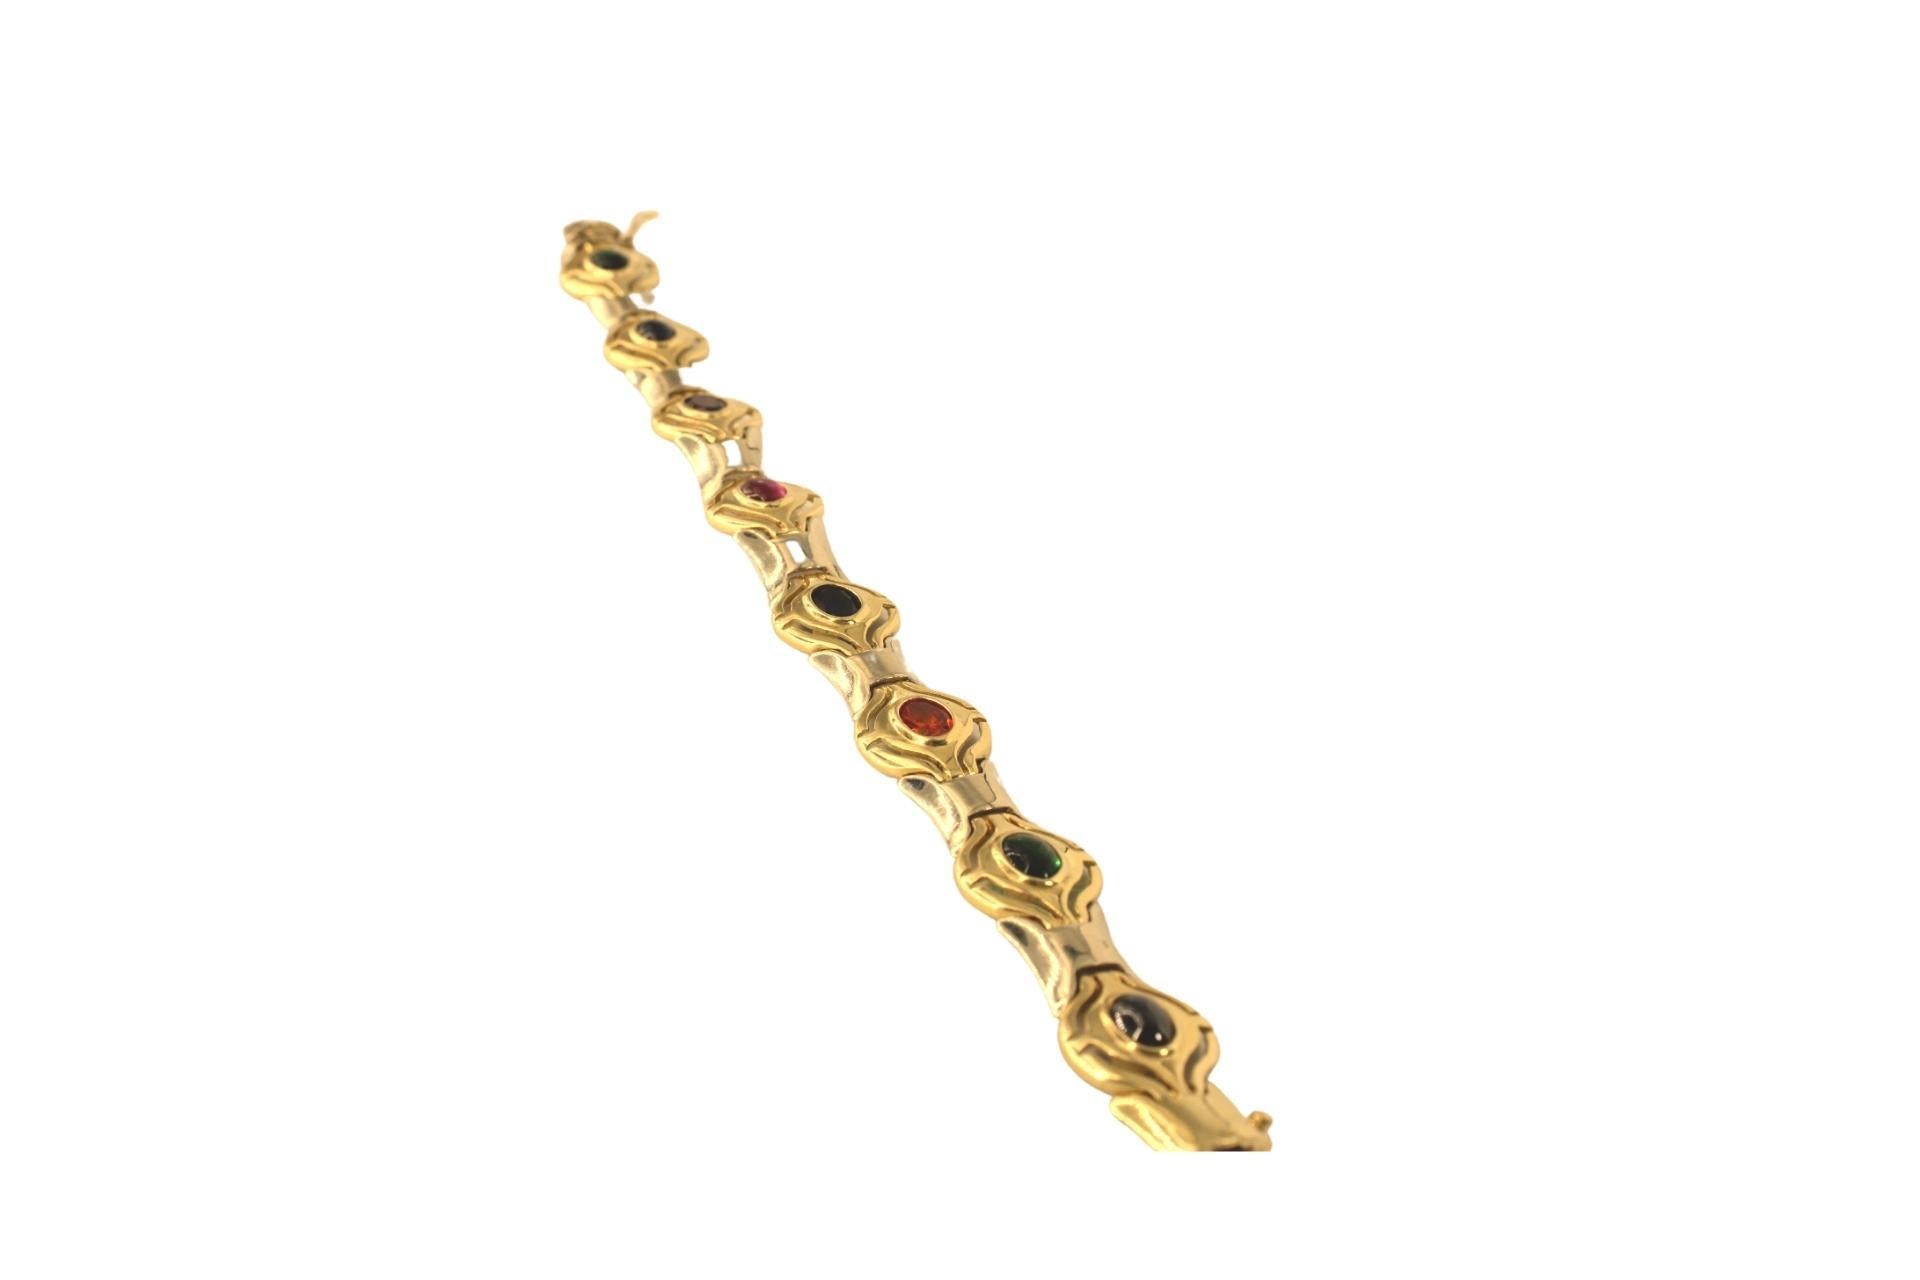 Multy Color Stones 14 karat Yellow-White Gold Bracelet
14 Karat Multi-Gemstone bracelet. This colorful link bracelet contains eleven oval faceted gemstones yellow gold
 length- approximately 7.3 inches or (18.7 cm)
width-approximately 1.5